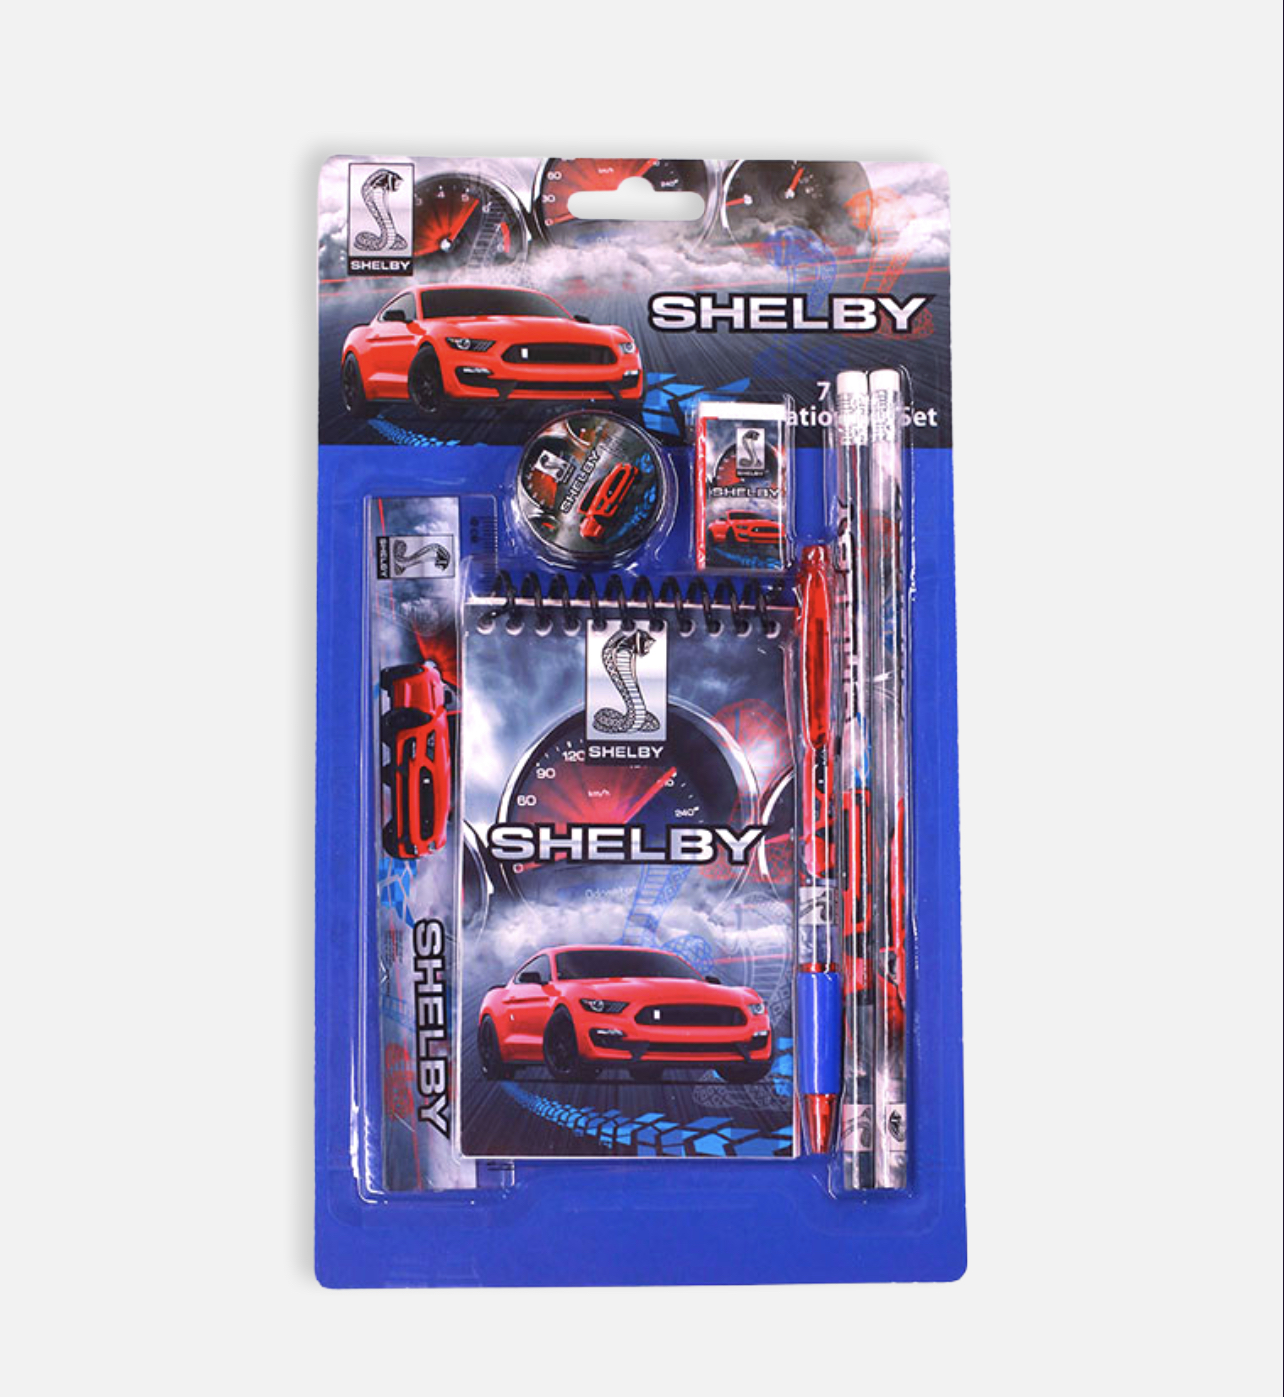 shelby - 7 in 1 stationery set